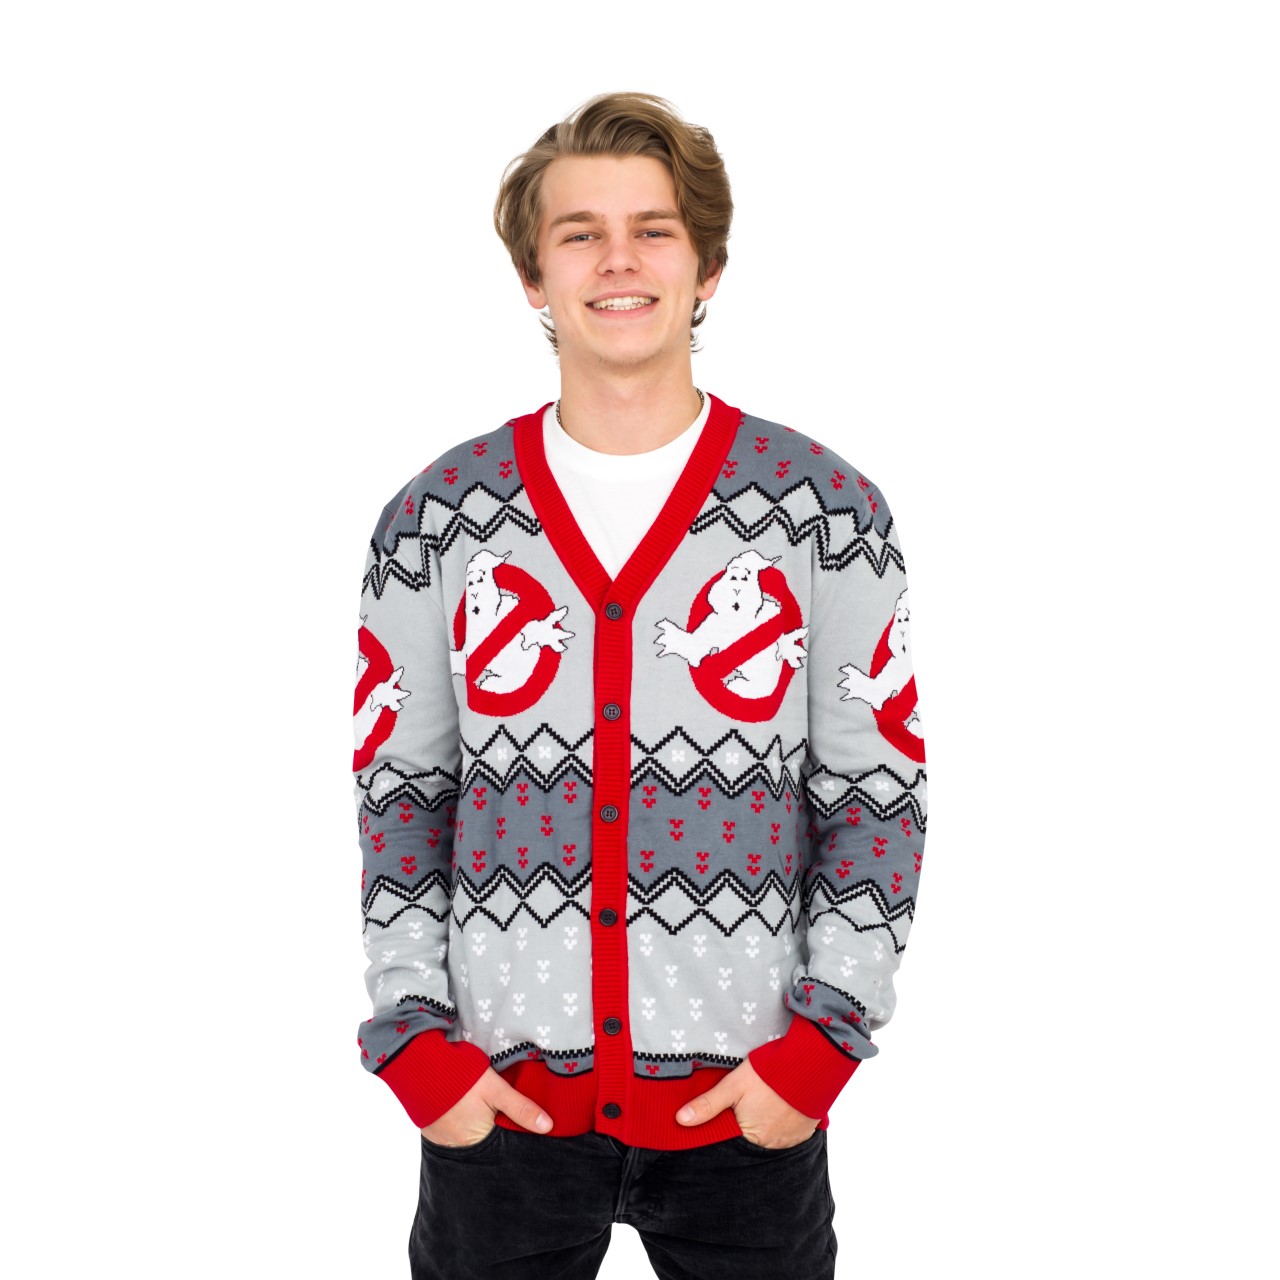 Ghostbusters Logo Ugly Christmas Cardigan Sweater,New Products : uglyschristmassweater.com